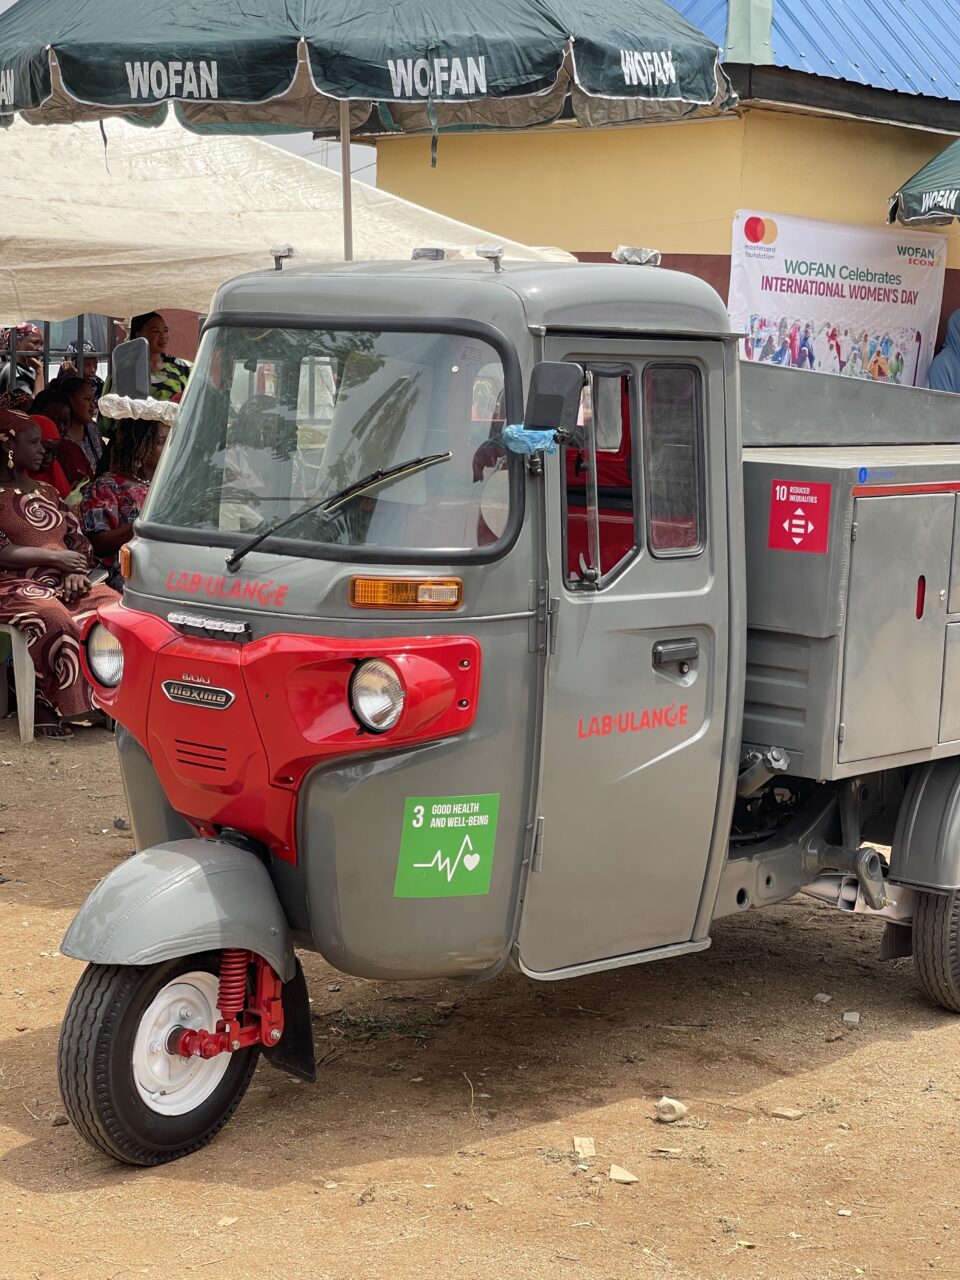 Mukhtasar Malcolm Alkali: Commemorating International Women’s Day, where an NGO generously supported a PHC Facility in Gwarimpa Village, with a customized tricycle to serve as an Ambulance